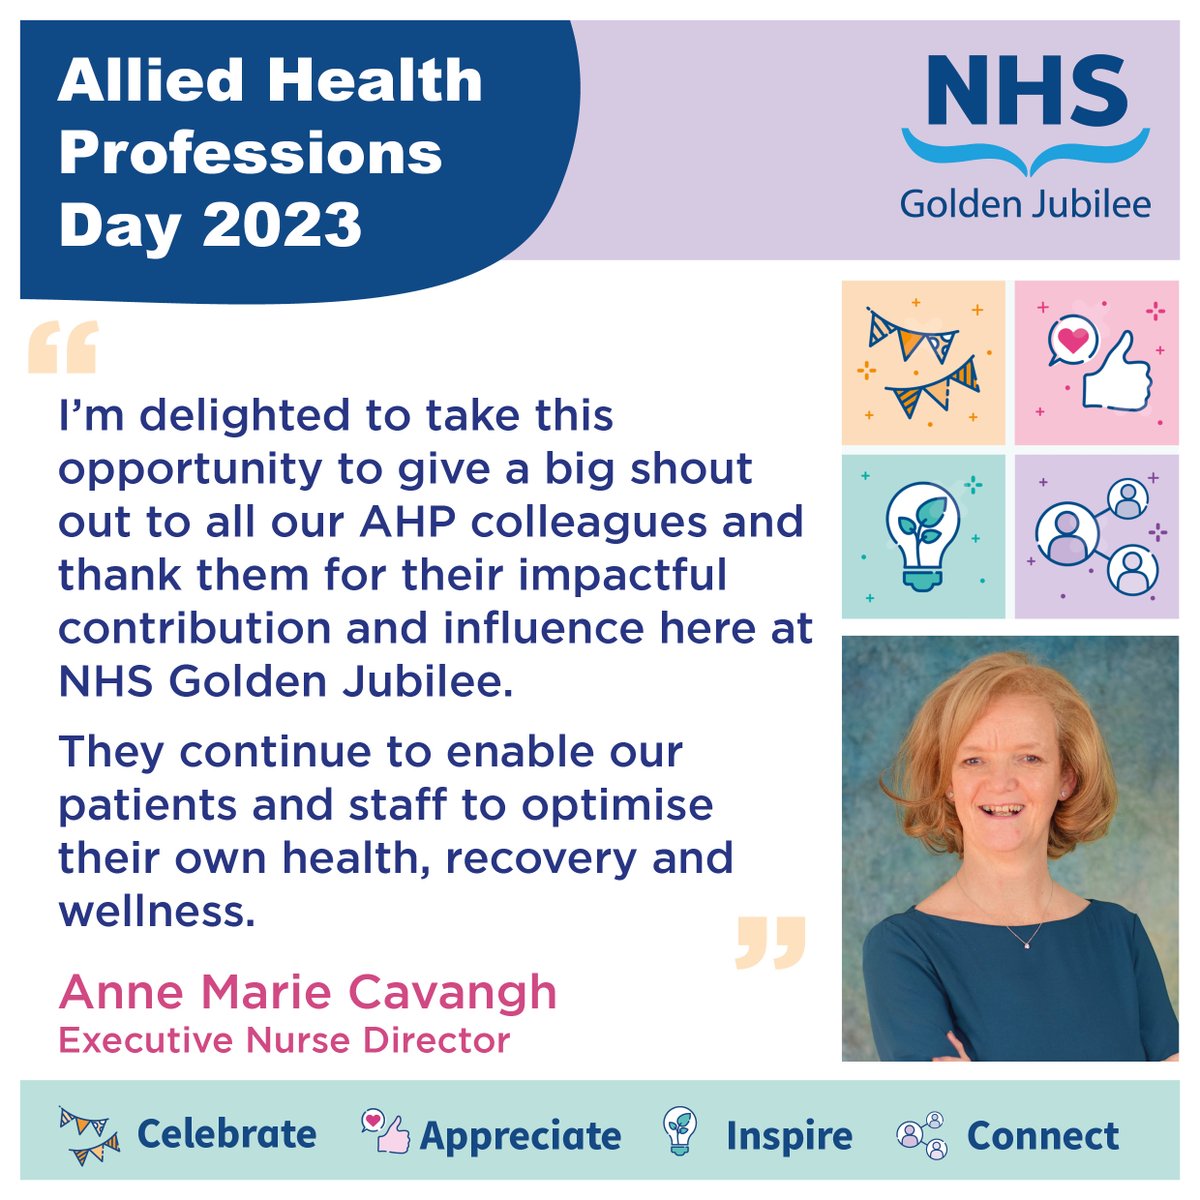 Nurse Director Anne Marie Cavanagh gives a big shout to all of our #AHPs to thank them for all their hard work and dedication to caring for the patients of Scotland ❤️
#AHPsDay #AHPsDayScot #AHPScot